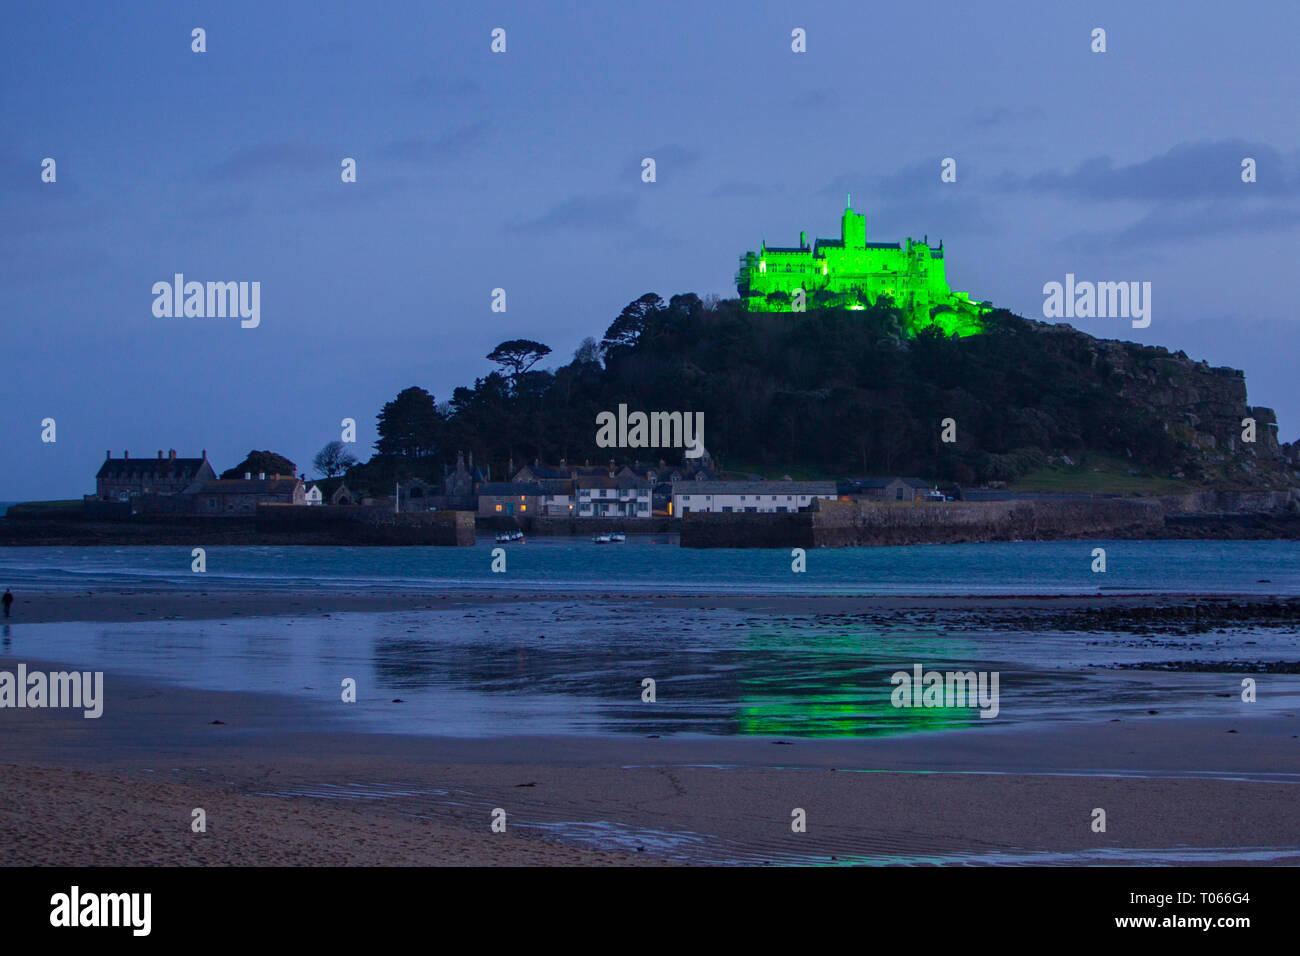 St Michael's Mount, Marazion, UK. 17th March 2019.  The Mount is lit up with green light to celebrate St Patrick's Day. Credit: Mike Newman/Alamy Live News. Stock Photo